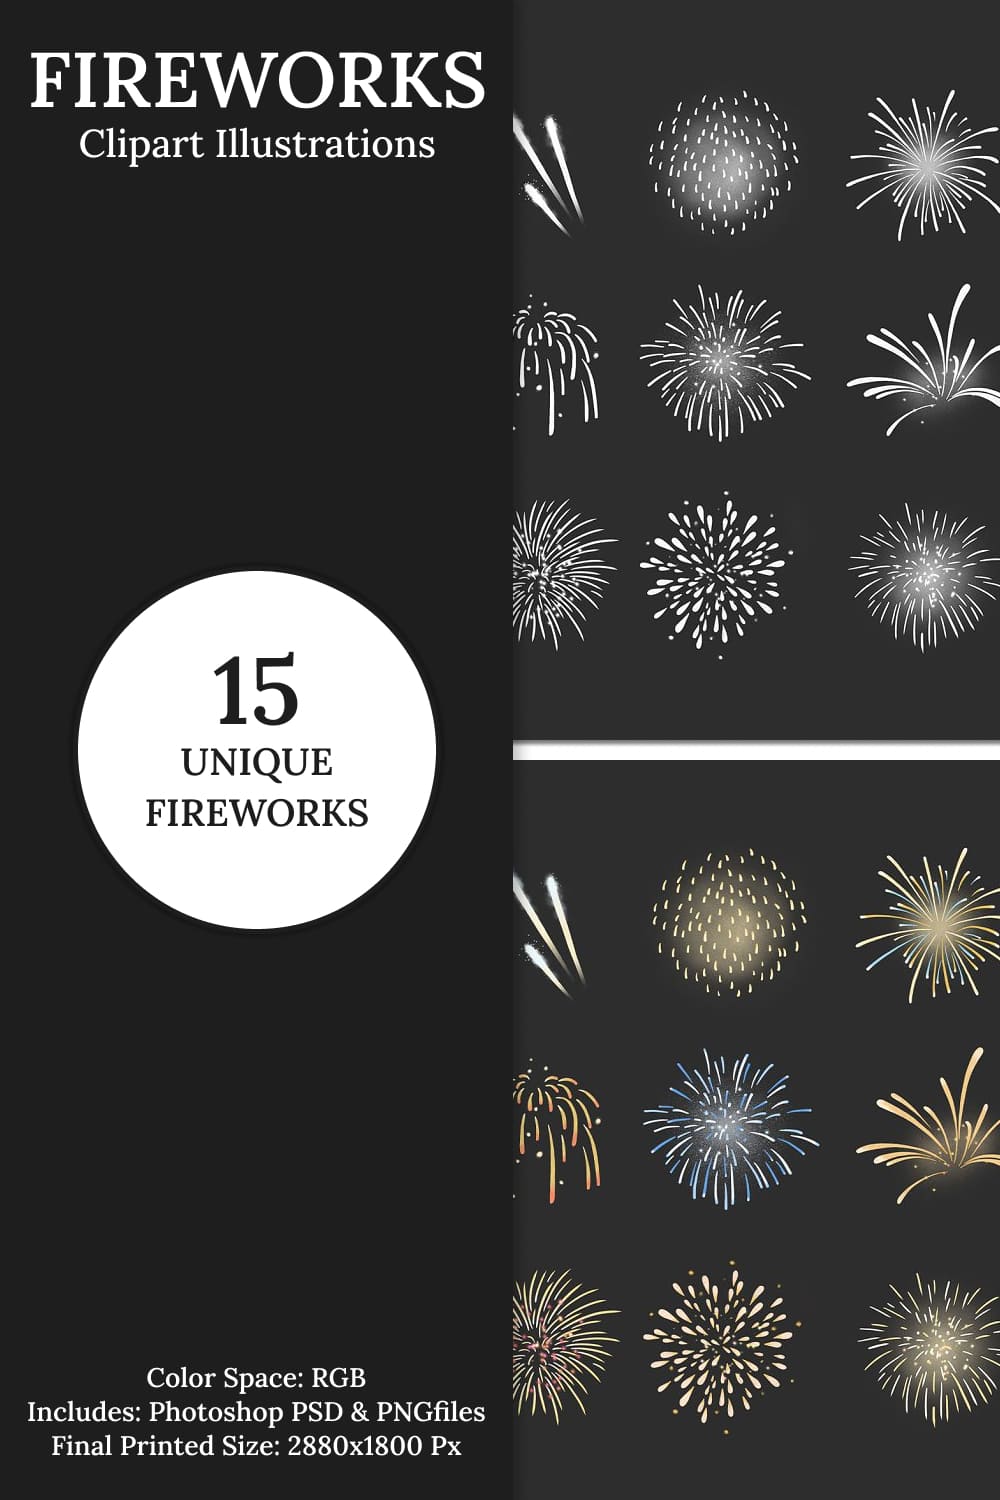 Fireworks Vector Clipart - pinterest image preview.